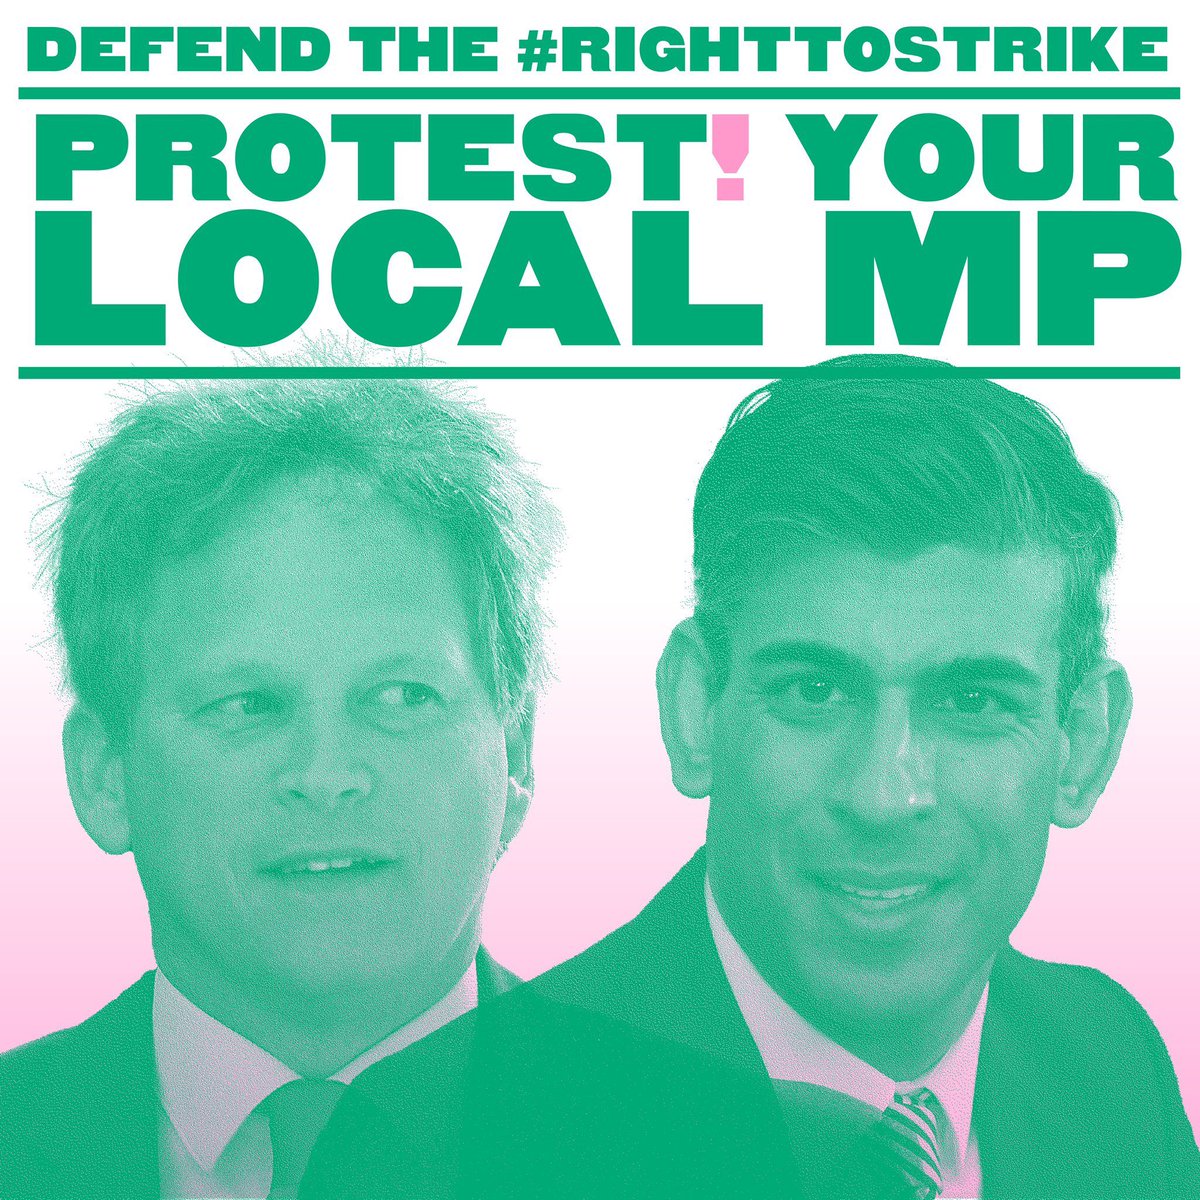 📢 PROTEST - Defend the Right to Strike! Join us this Saturday at 11am to protest outside the office of Tory MP, Richard Holden as we defend the right to strike in the face of the Tory anti-strike law. Join us at 11am at 25-27 Medomsley Road, Consett, DH8 5HE. #EnoughIsEnough